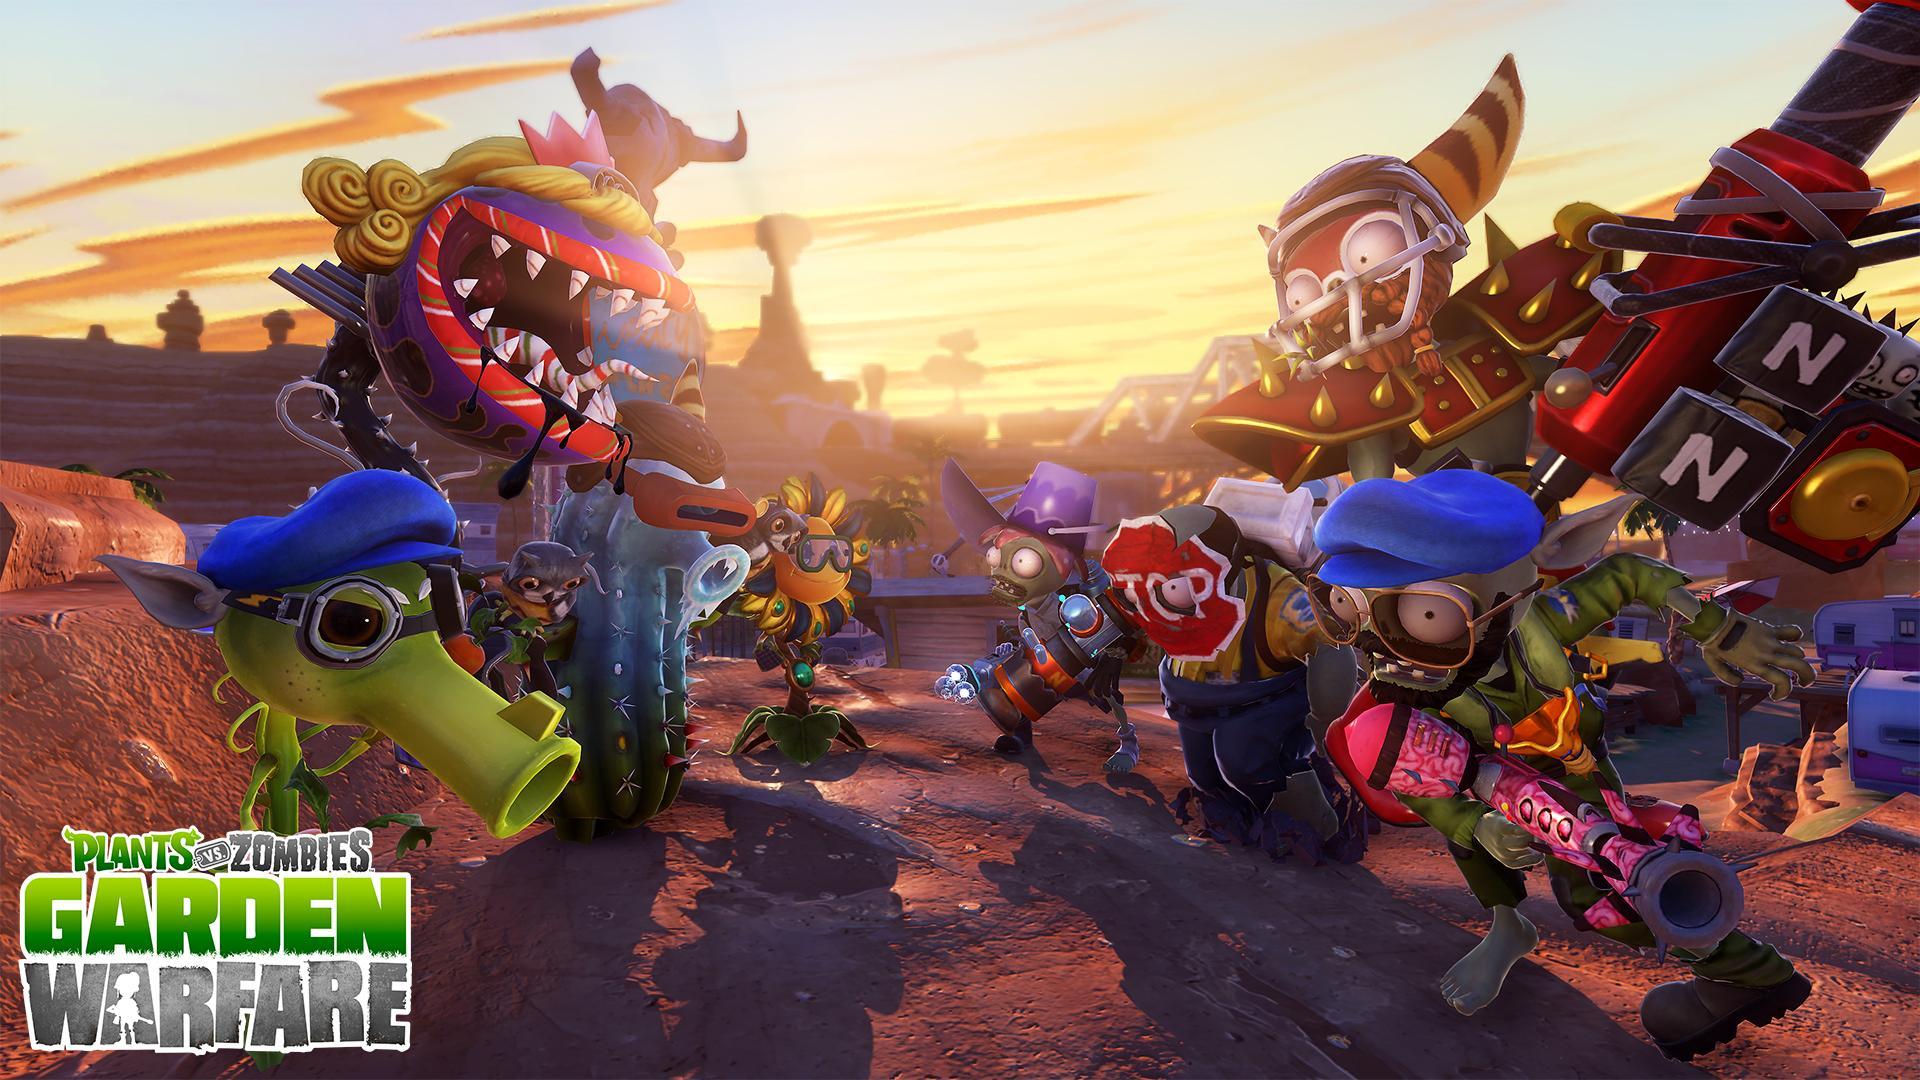 Plants vs. Zombies: Garden Warfare comes to PlayStation in August